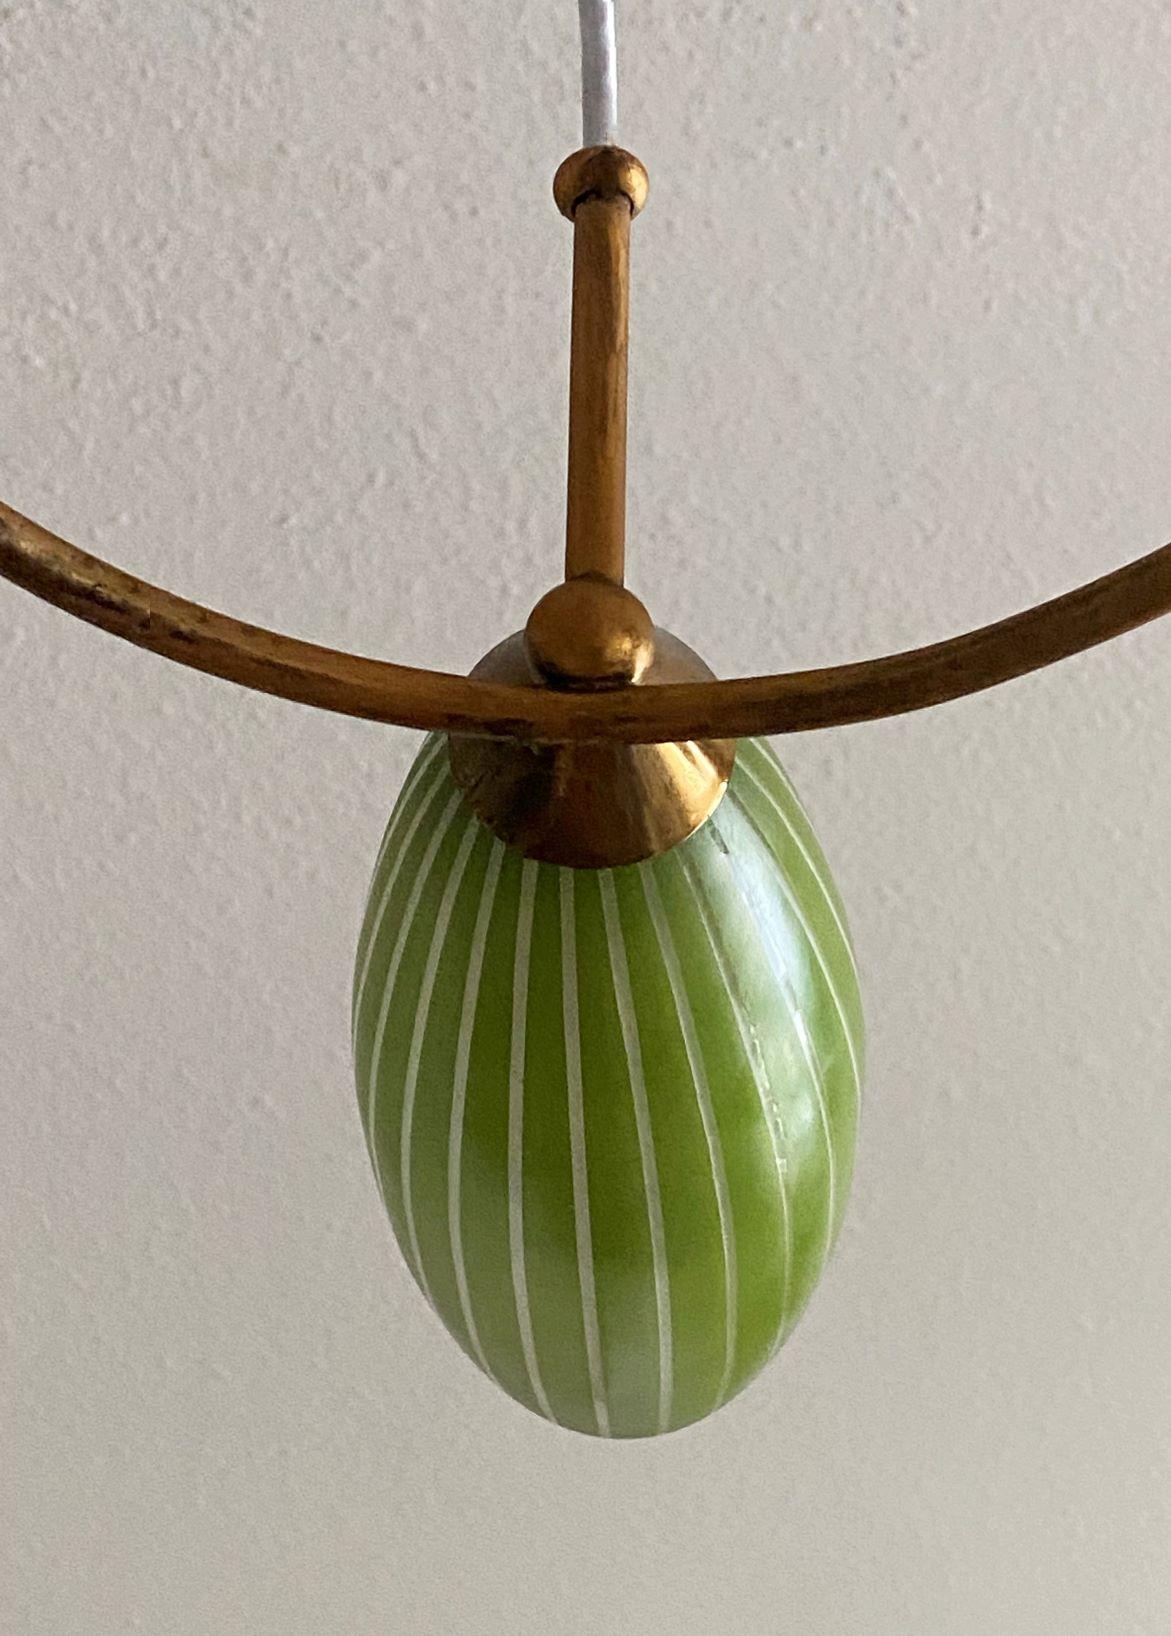 Stilnovo Chandelier Six Green and White Glass Tulips Brass Mounted, Italy, 1950s For Sale 10